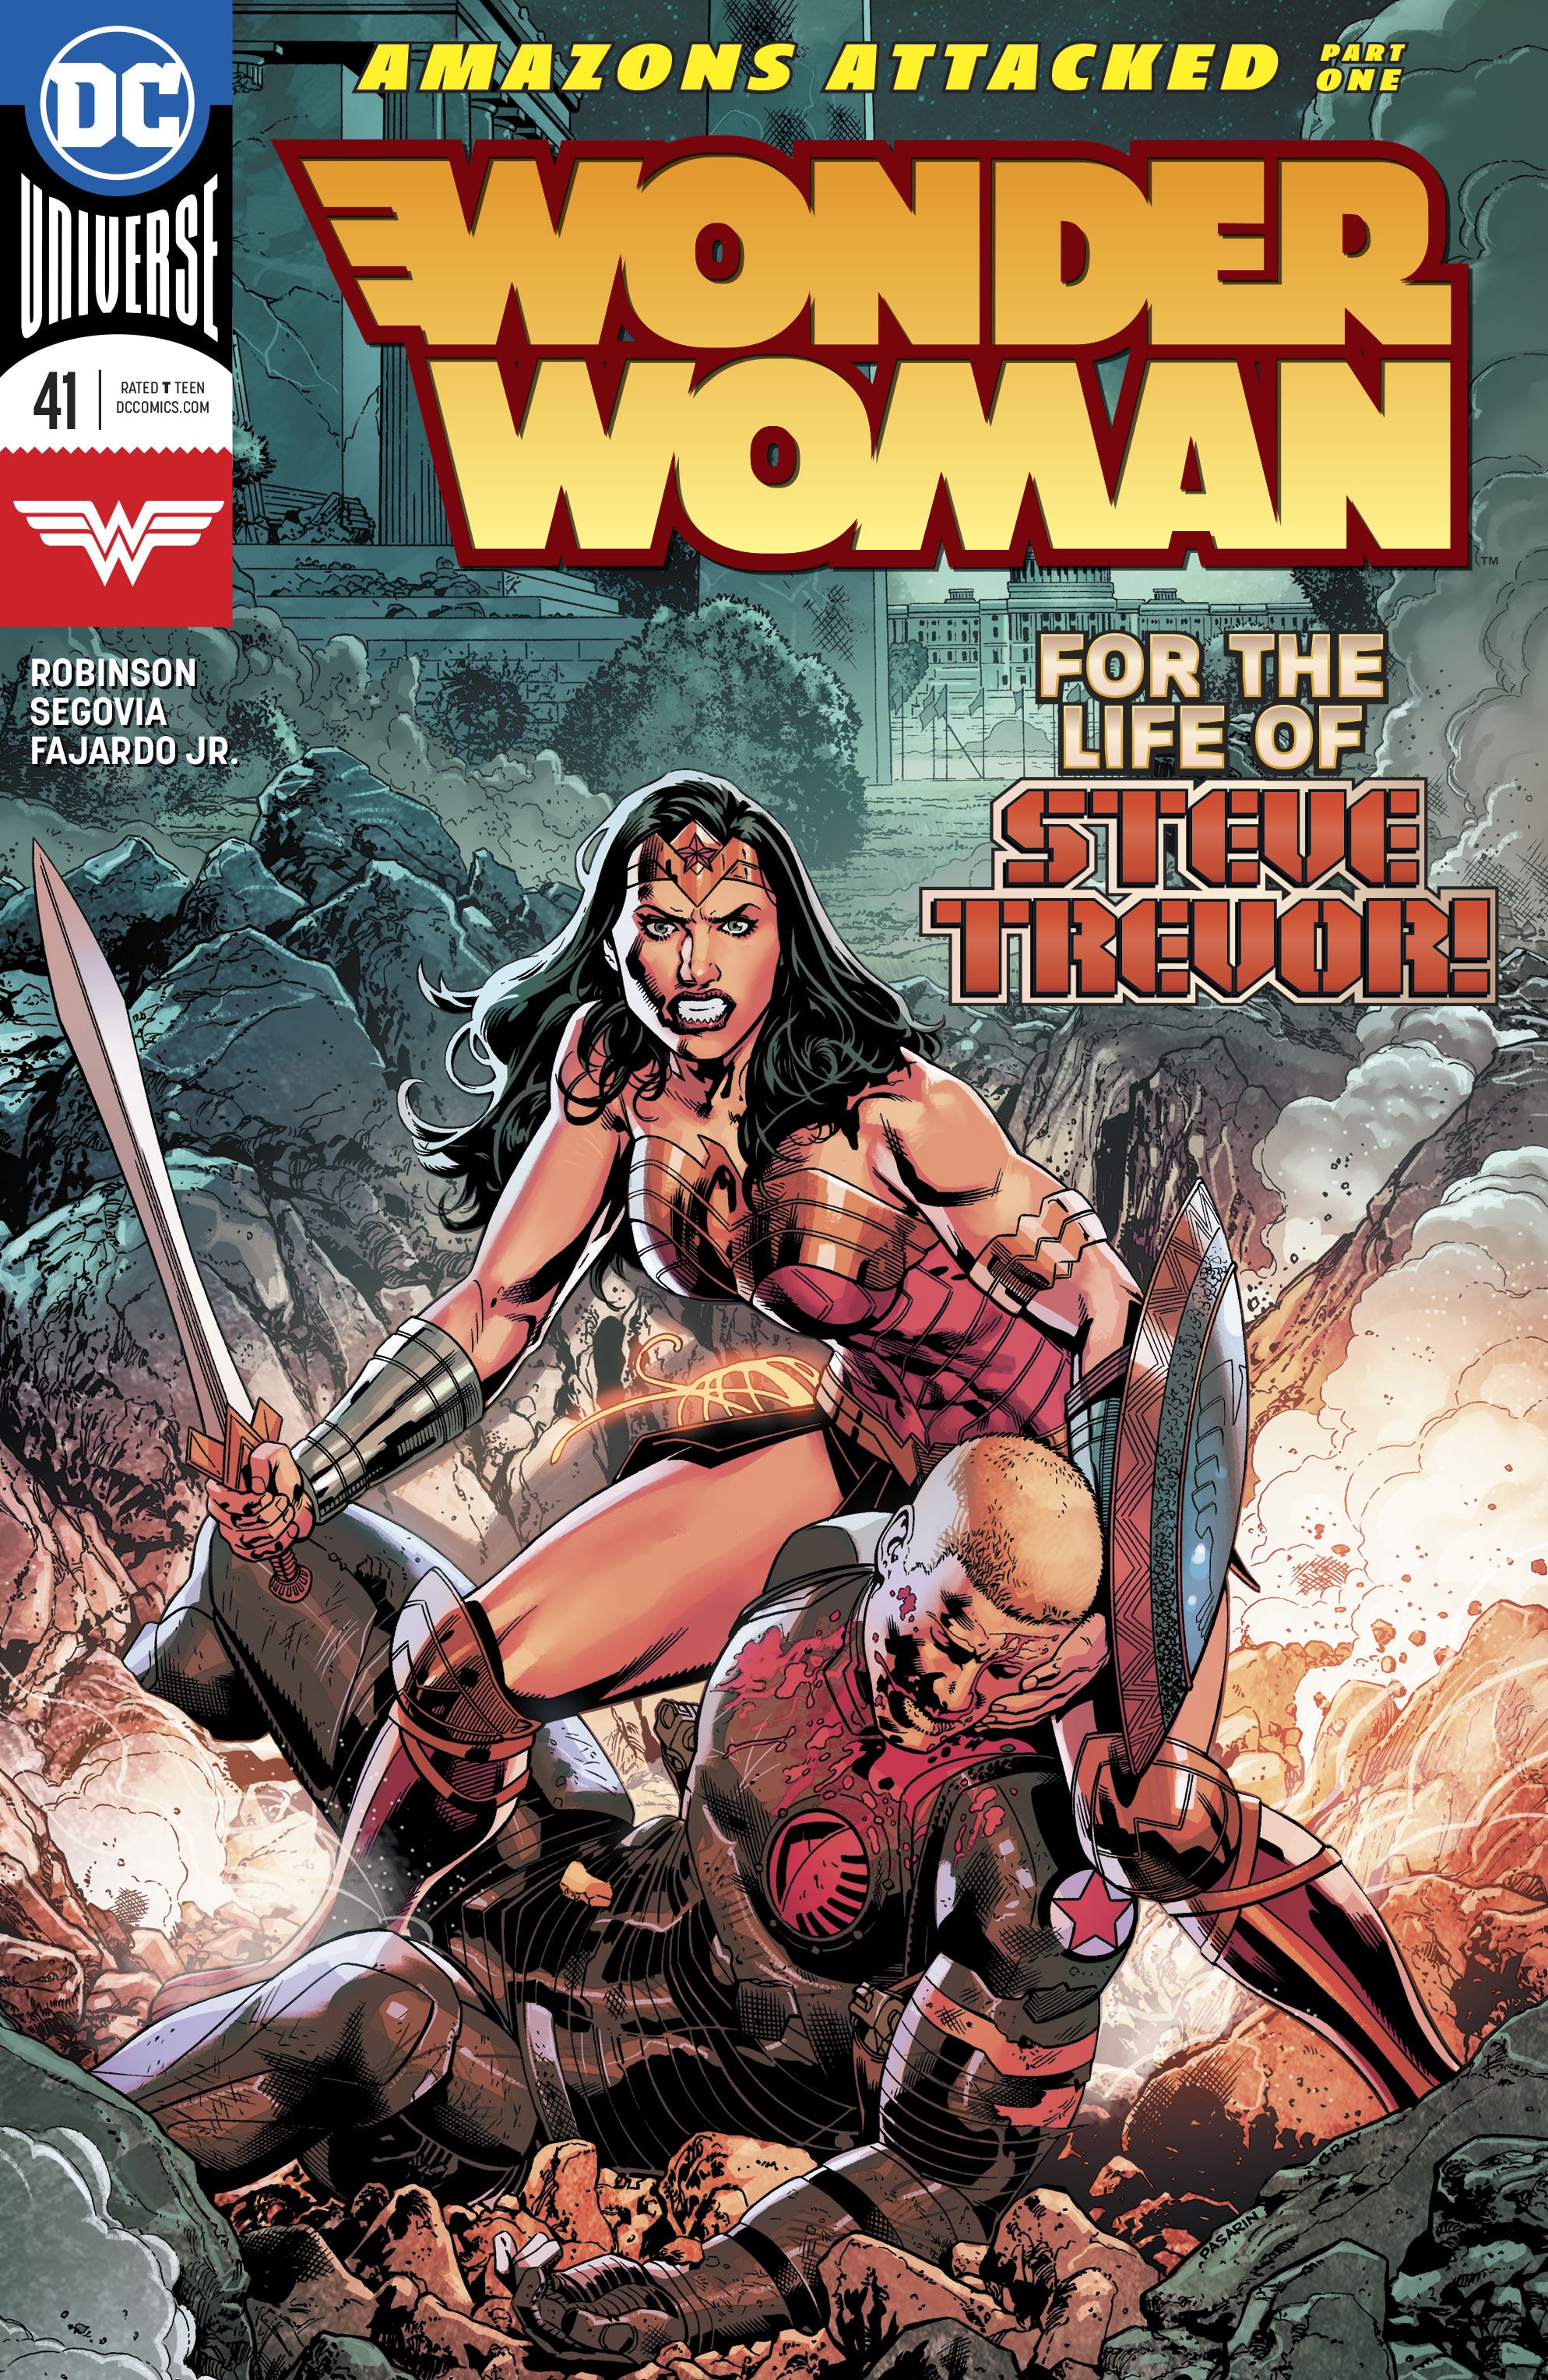 WONDER WOMAN #41 | Game Master's Emporium (The New GME)